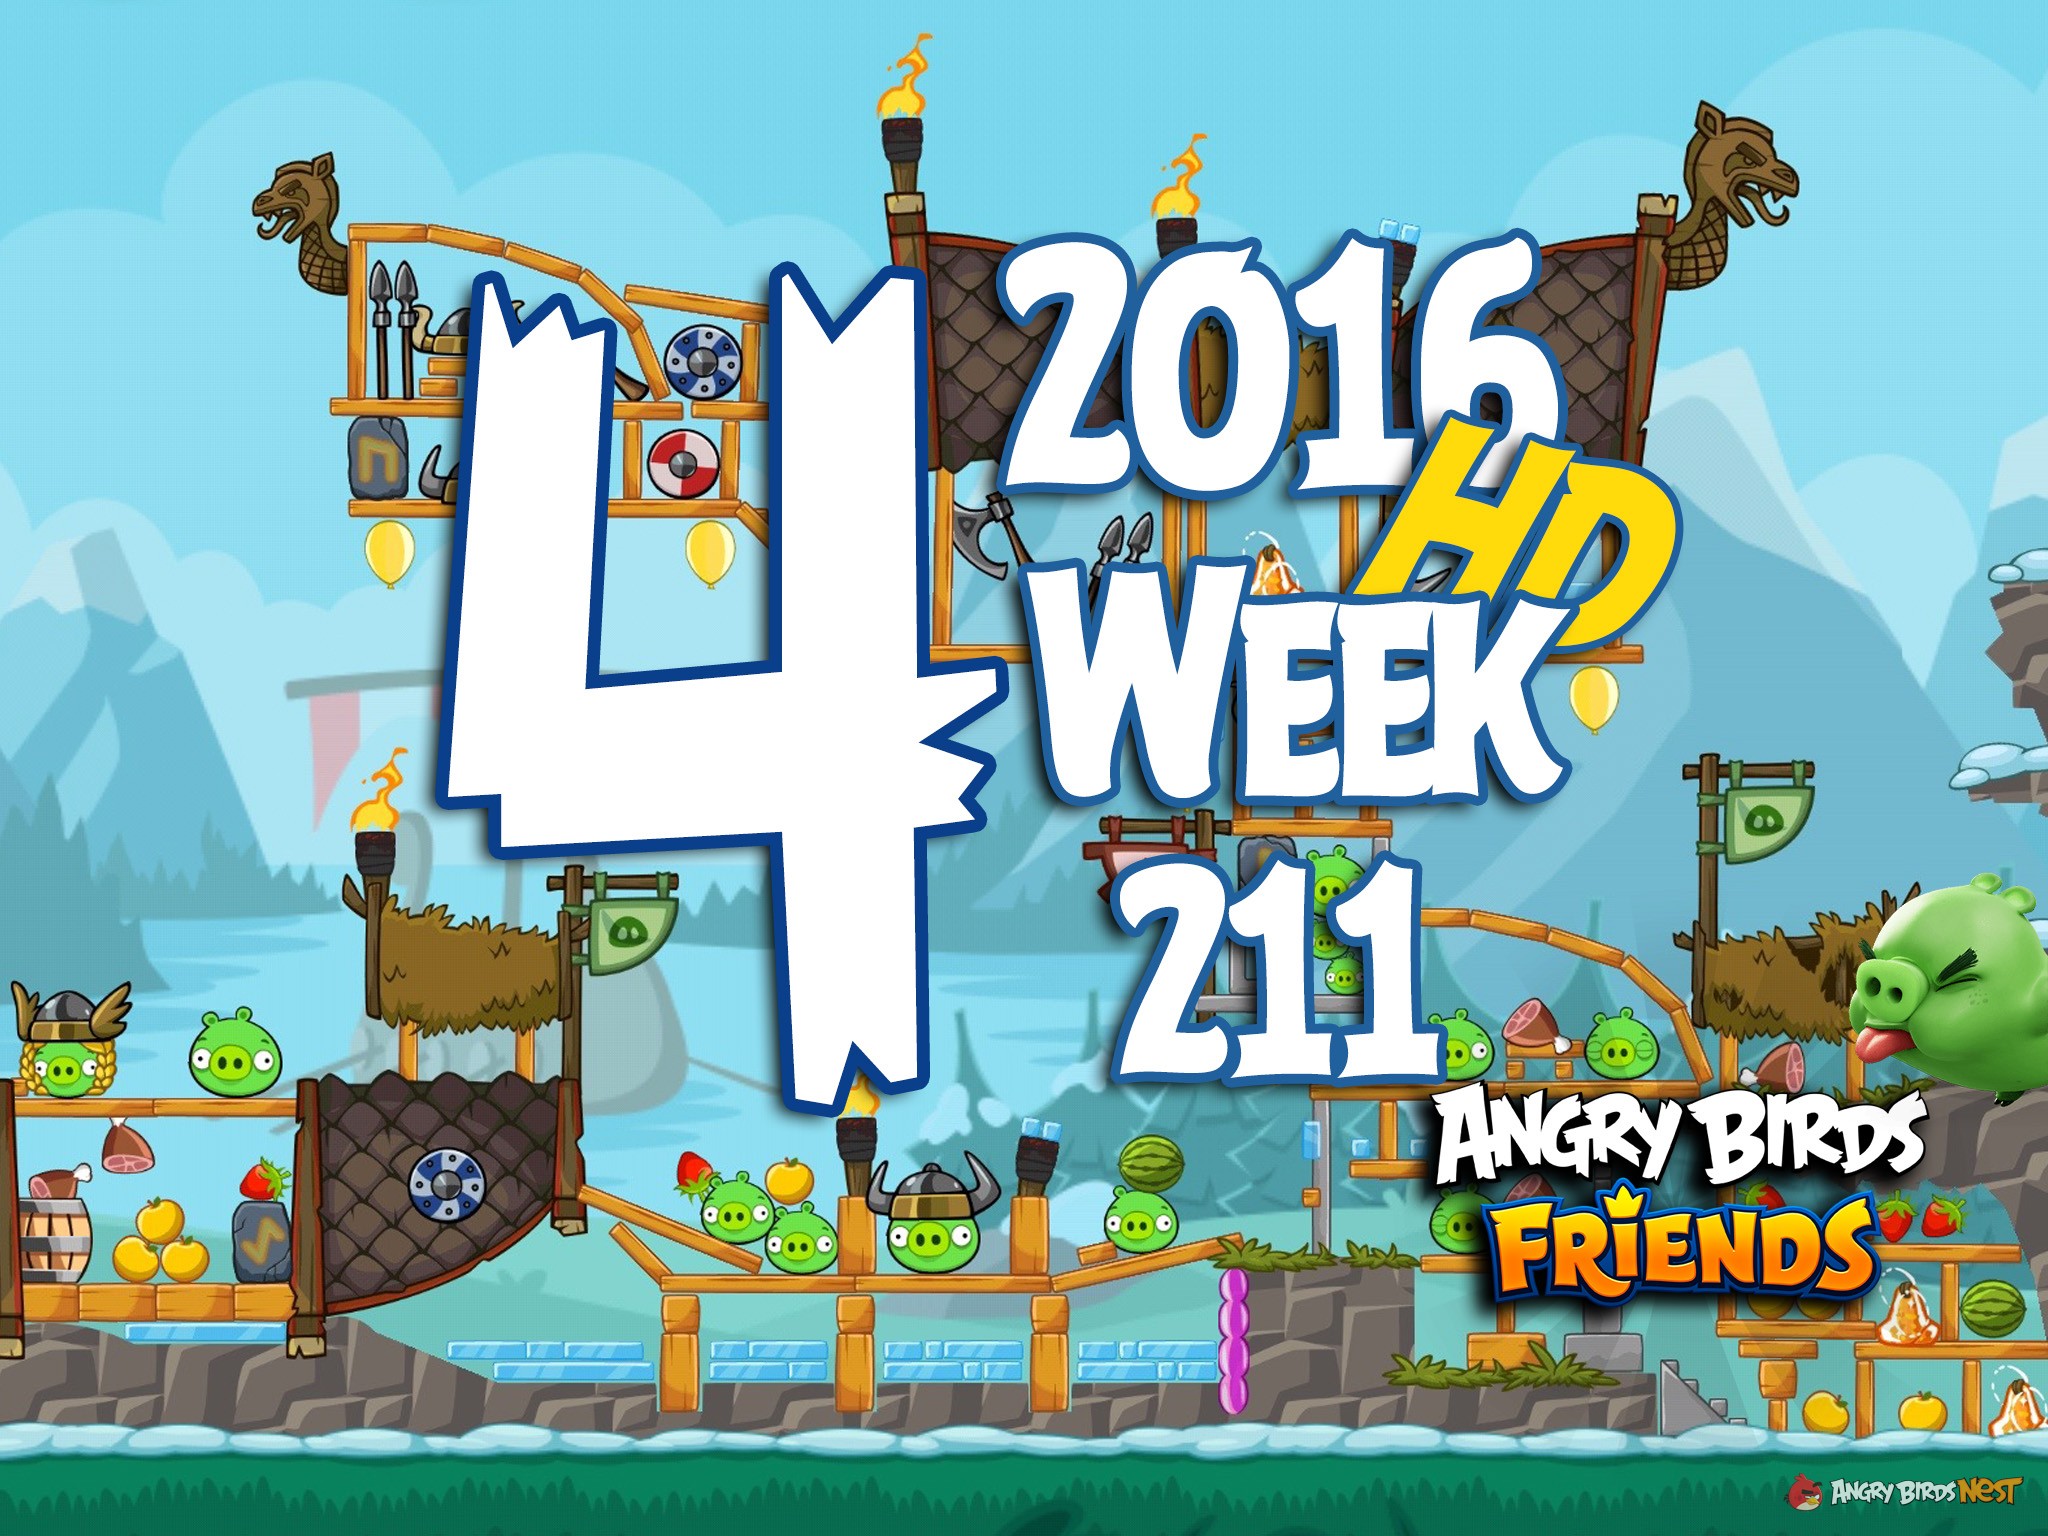 angry birds with friends tournament amusement pork level 4 week 458